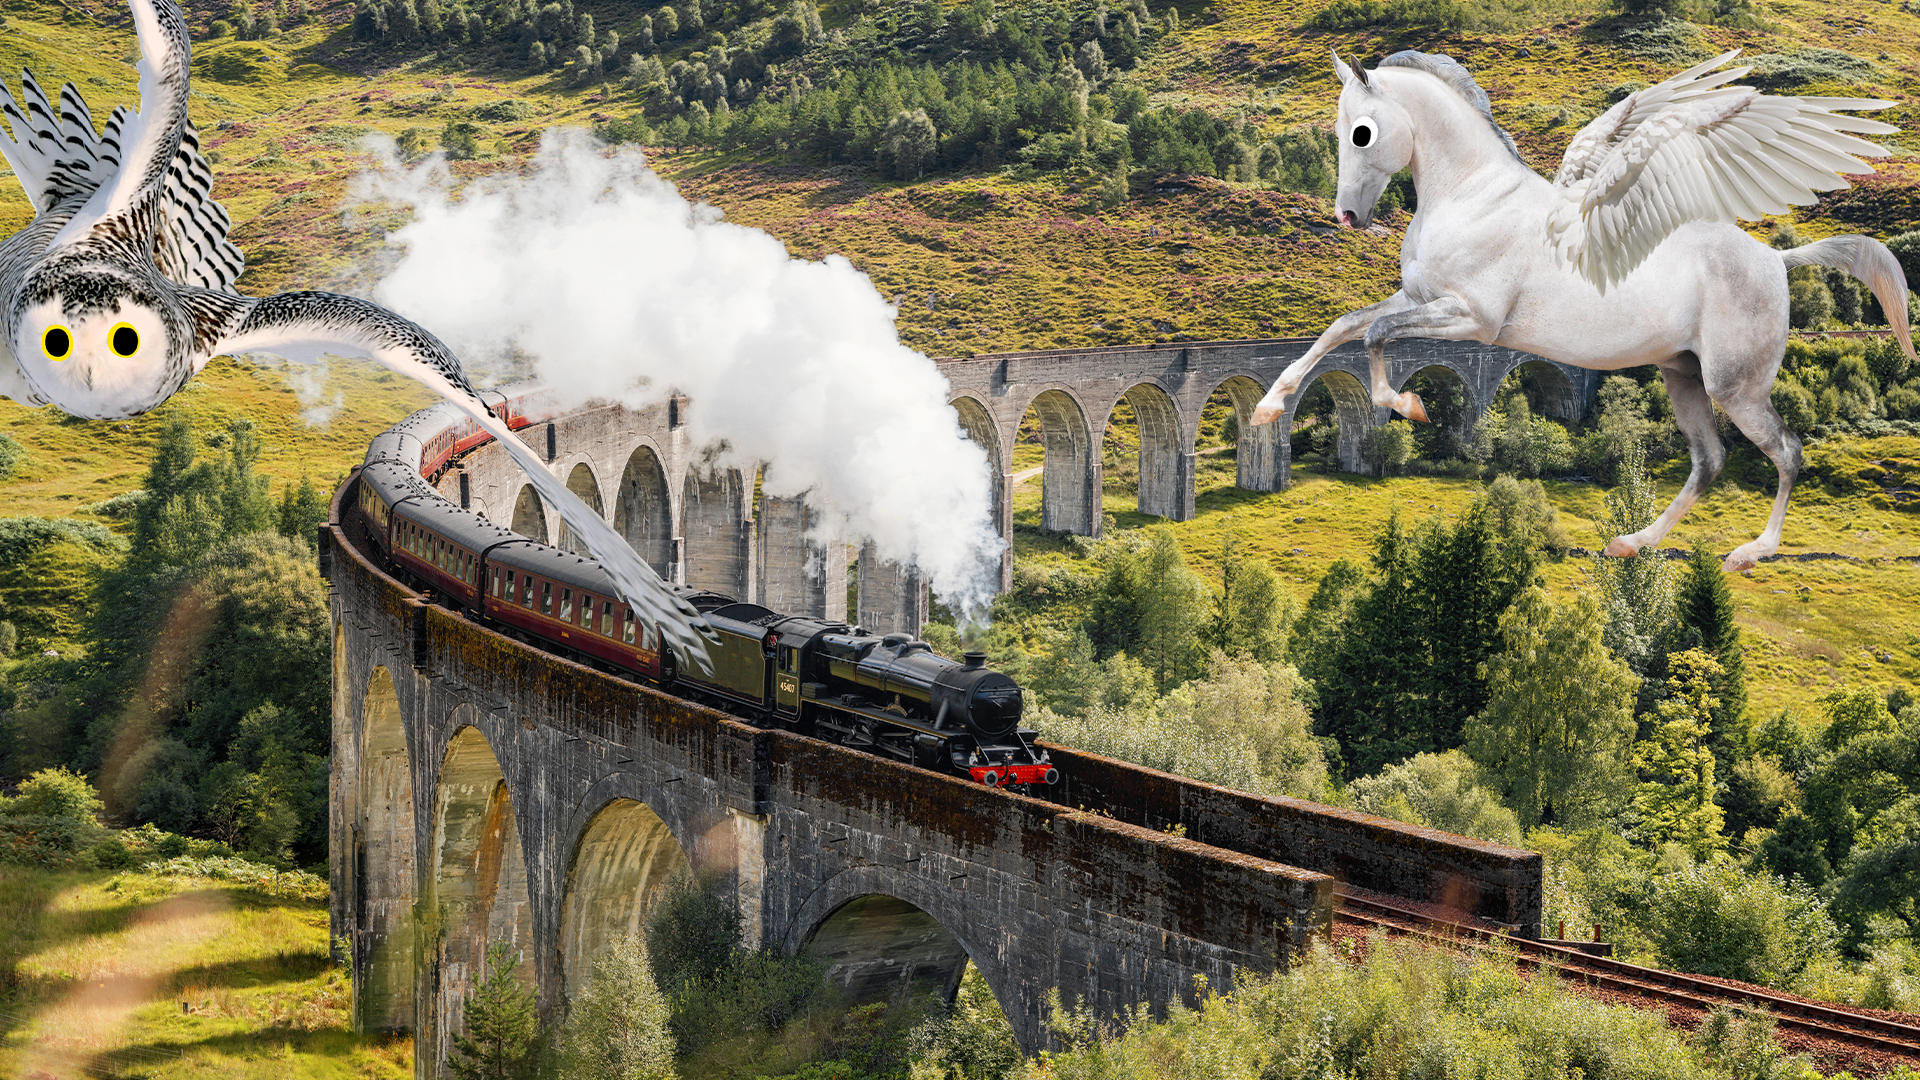 Steam train on viaduct with owl and pegasus